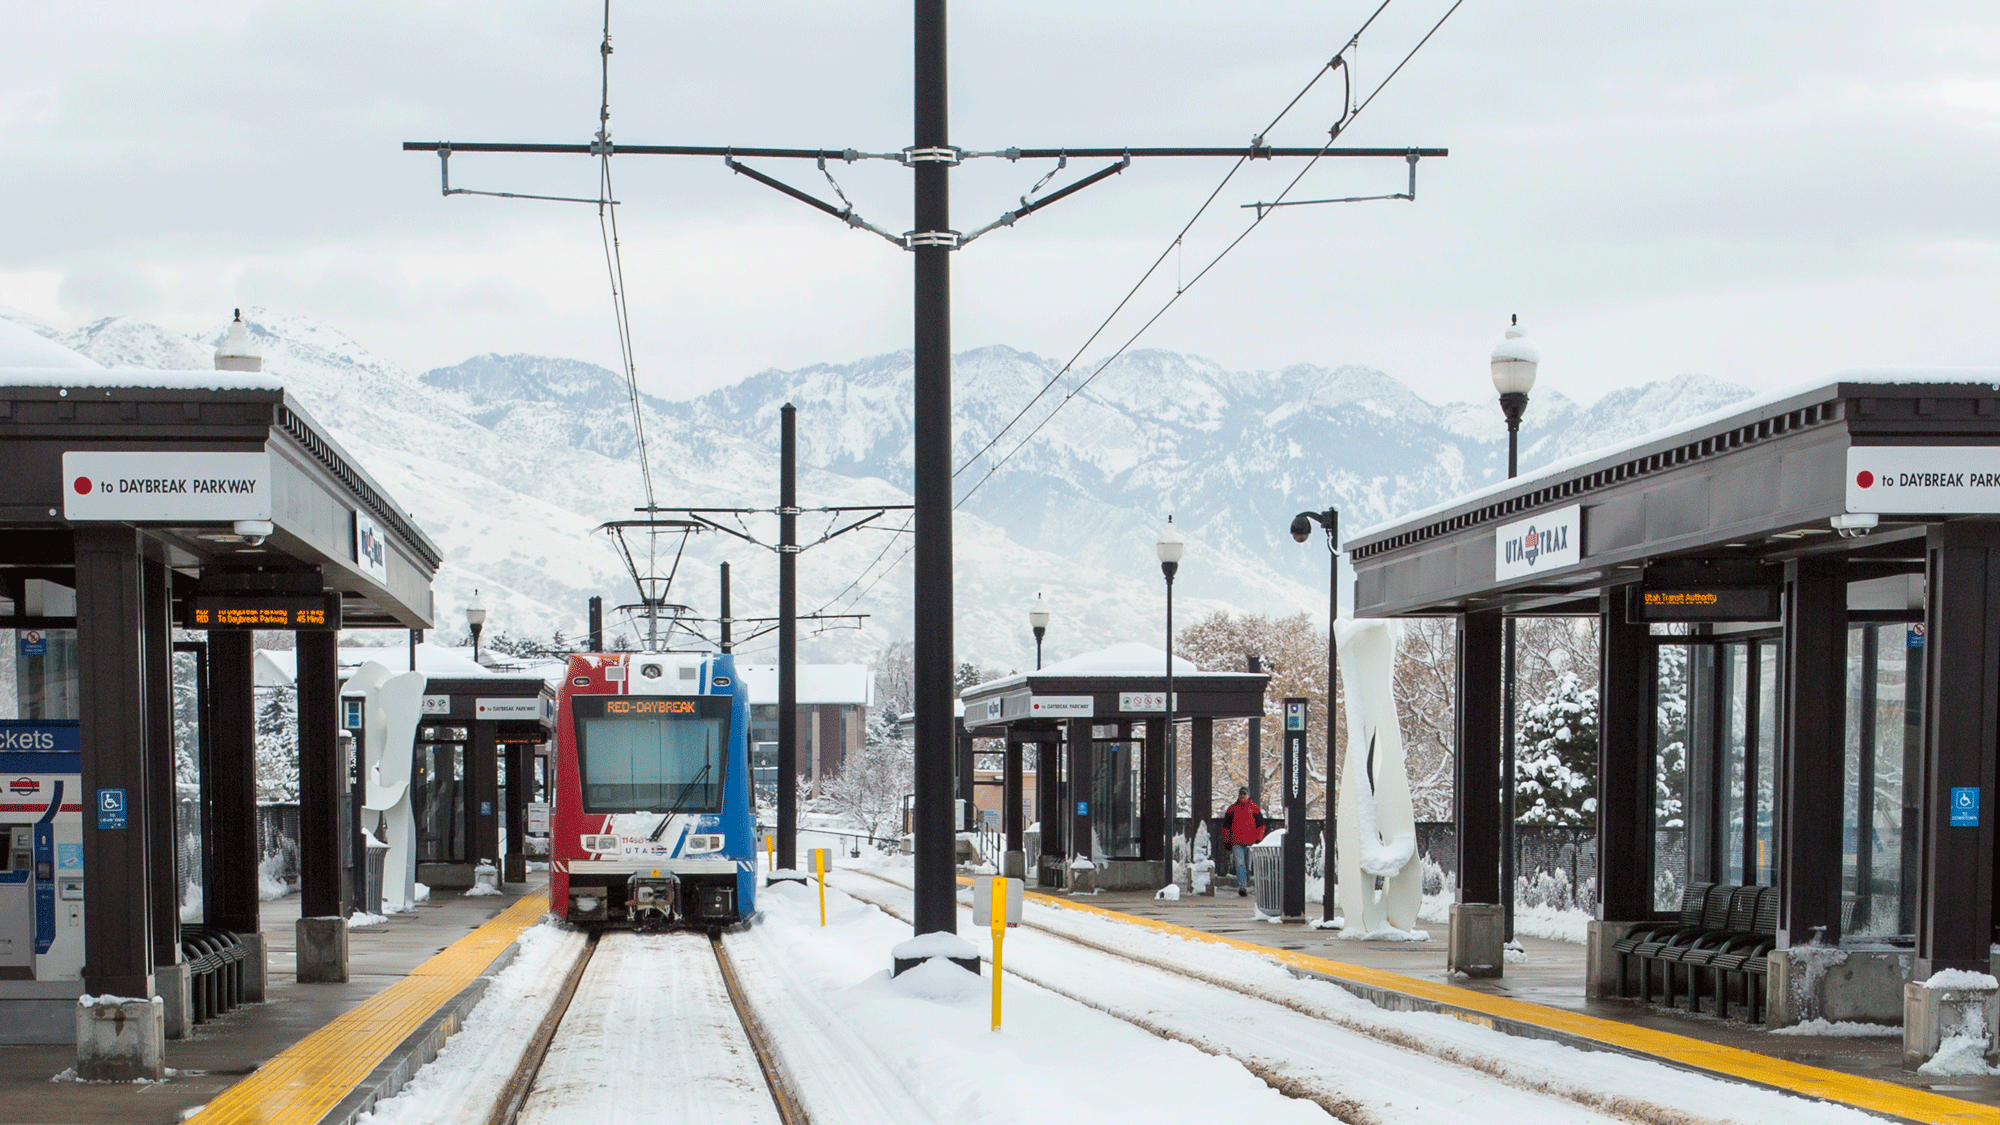 An eastbound light rail train arrives at the Stadium station on a snowy day.